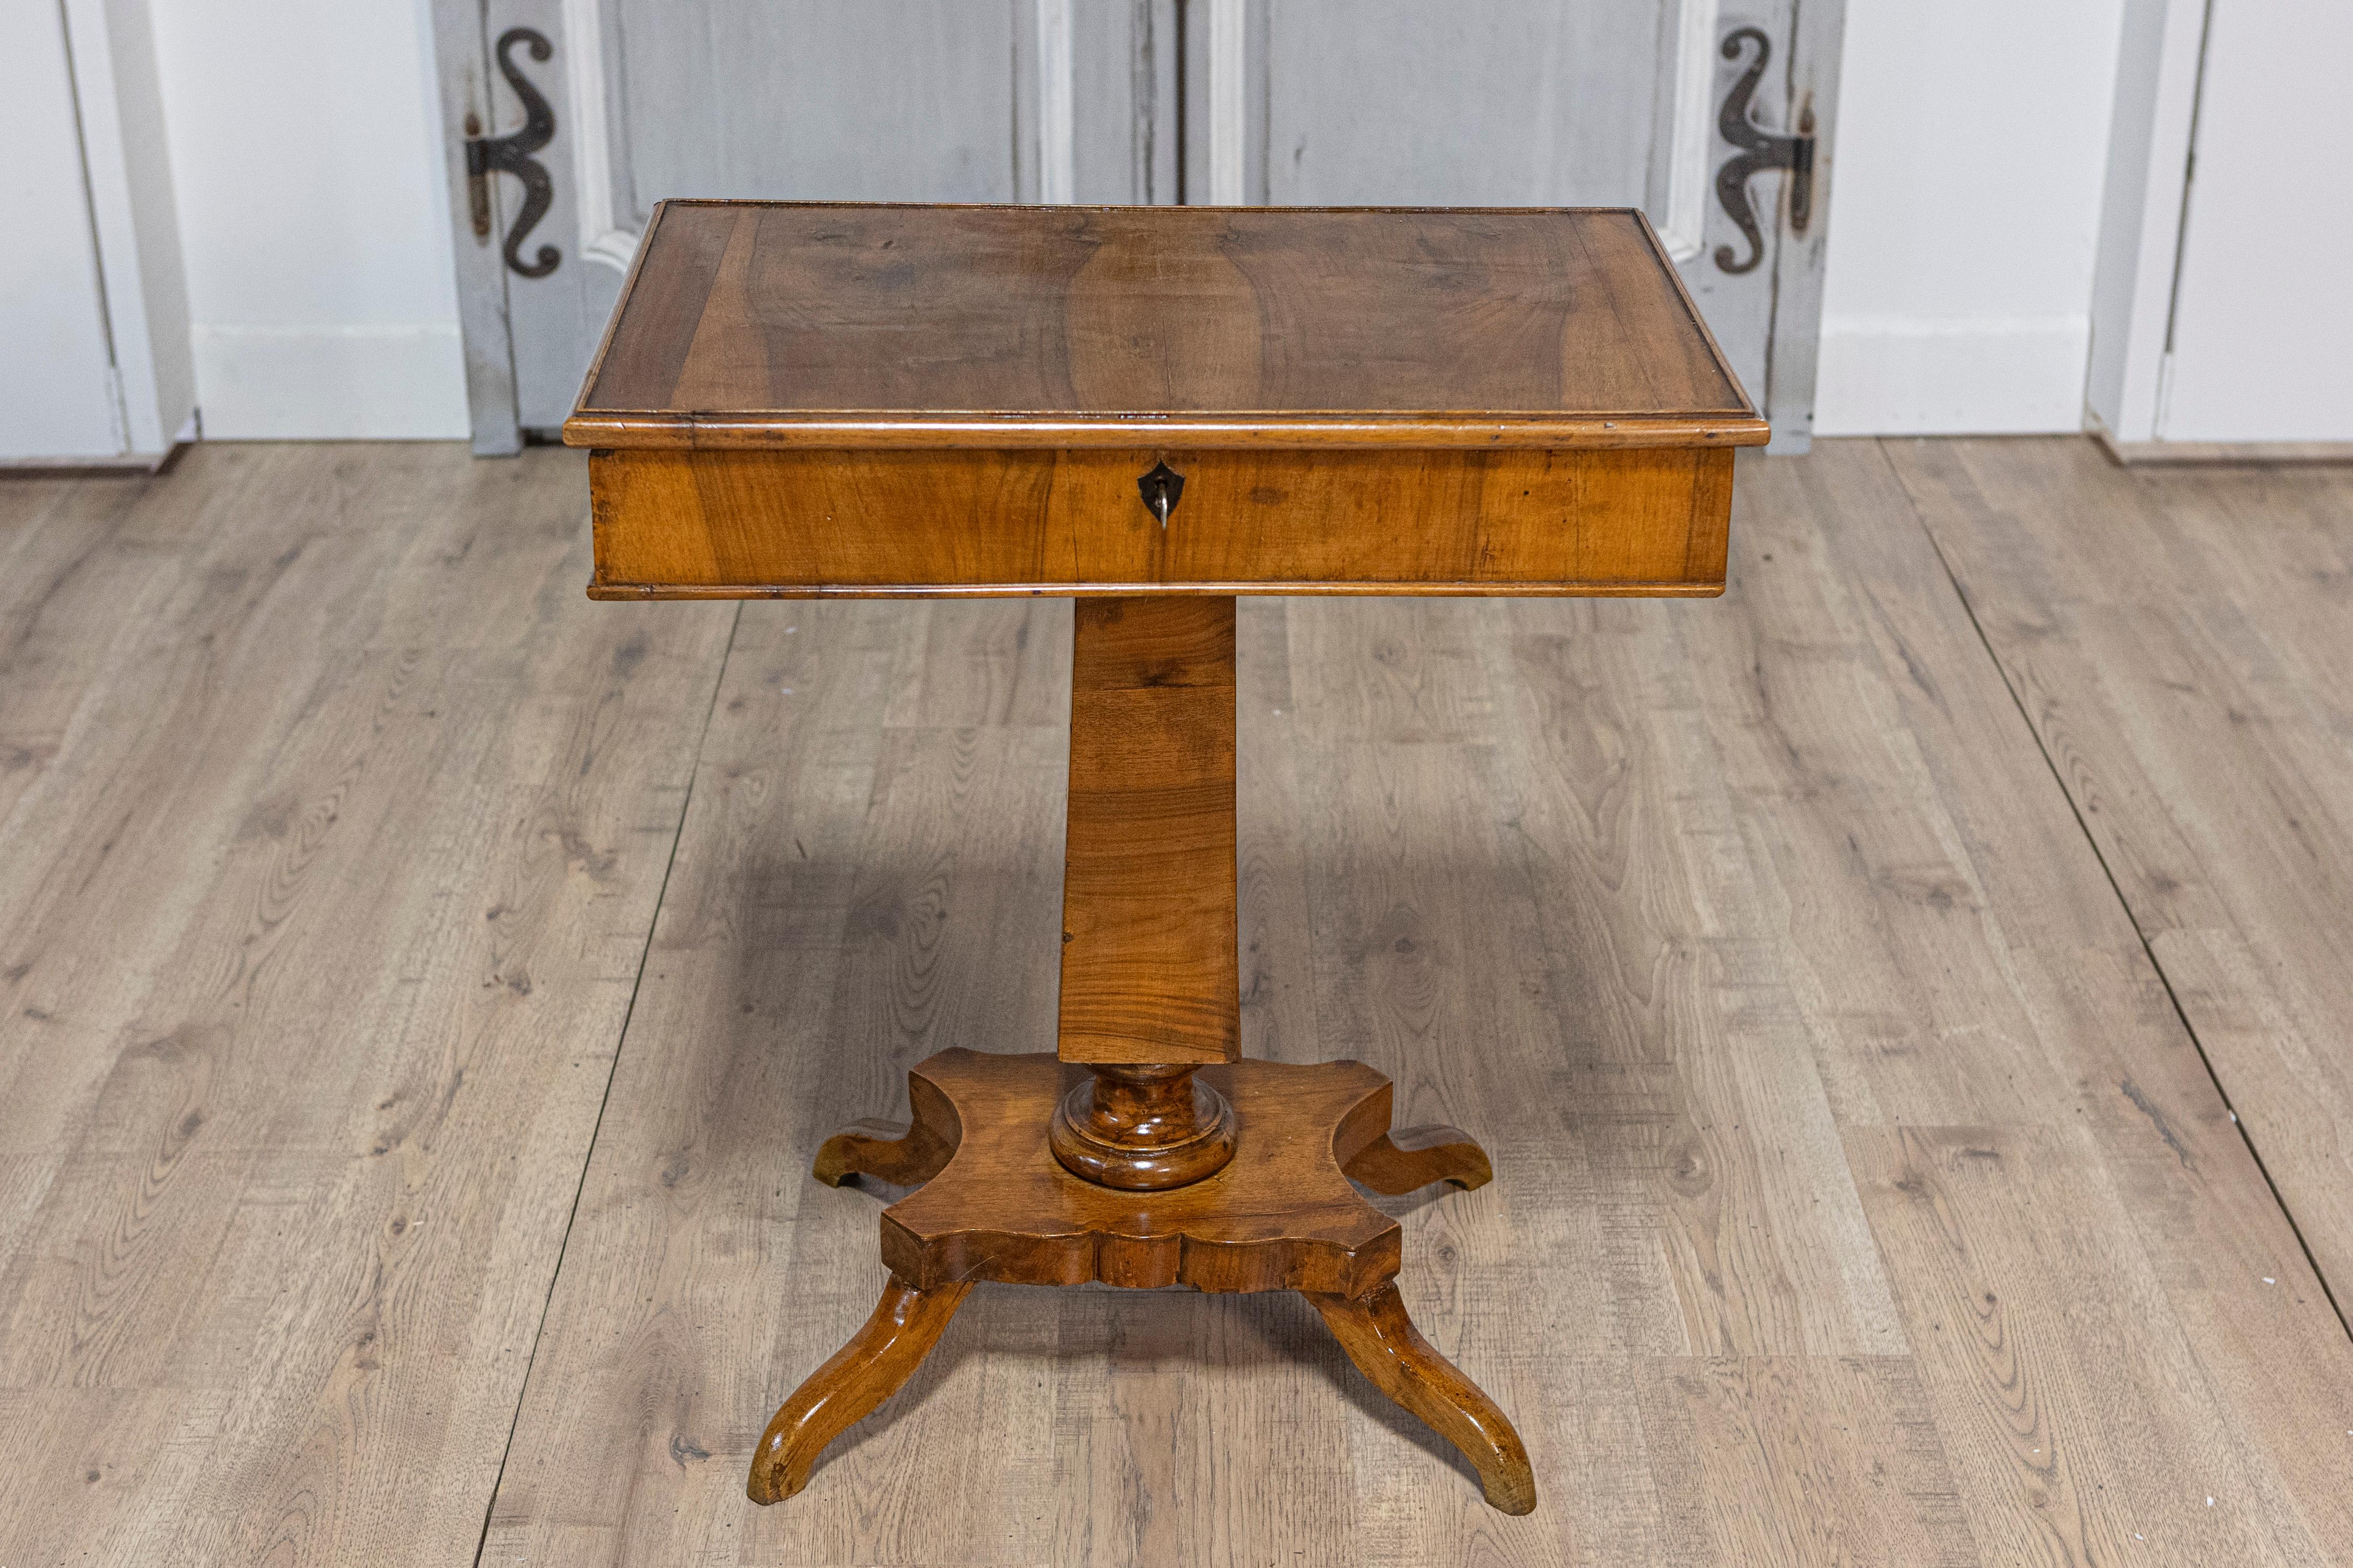 An Italian walnut pedestal table from the 19th century with single drawer and quadripod base. This exquisite Italian walnut pedestal table from the 19th century exudes classic elegance with its functional design and refined aesthetics. Featuring a